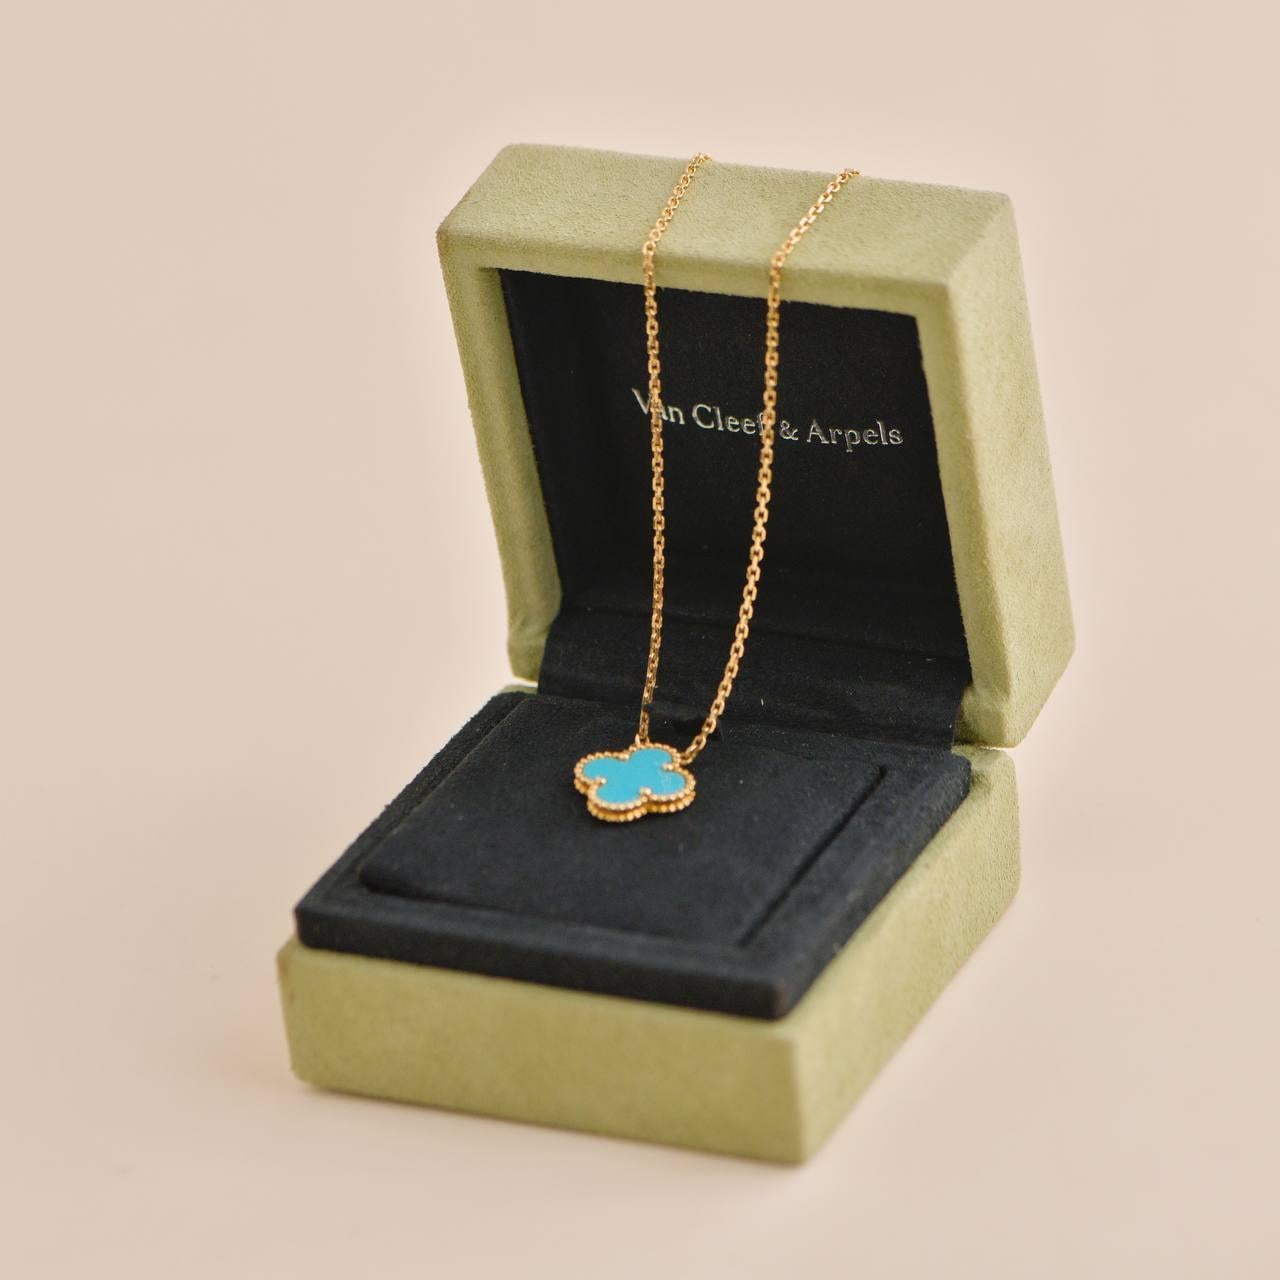 SKU	AT-2291
Comes With	Box Only
Date	2014
RRP	£ 10,200 Inc taxes / $ 10,800 Excl taxes / 11,600 € Inc taxes
Model	ARA45700
Serial Number	JE******
Metal	18k Yellow Gold
Stones	Turquoise
Weight	5.8 g
Length	42 cm
Width	1.5 cm
Condition	Excellent